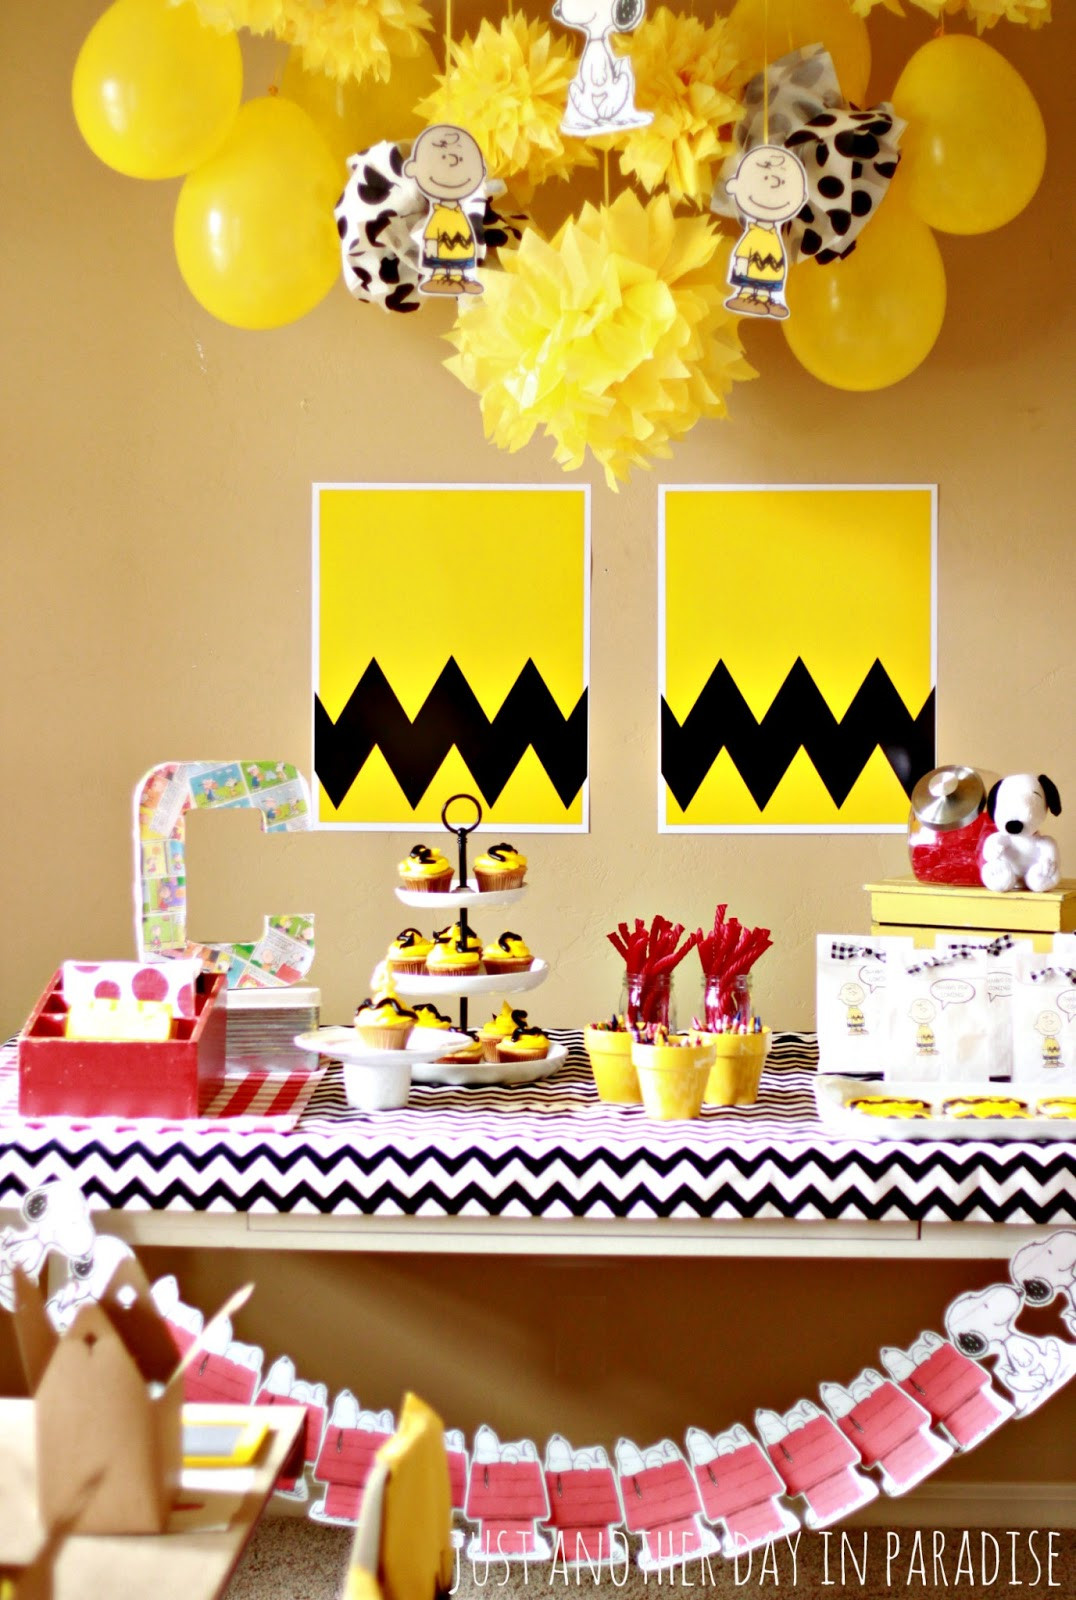 Snoopy Birthday Decorations
 Larissa Another Day A Charlie Brown Birthday Party